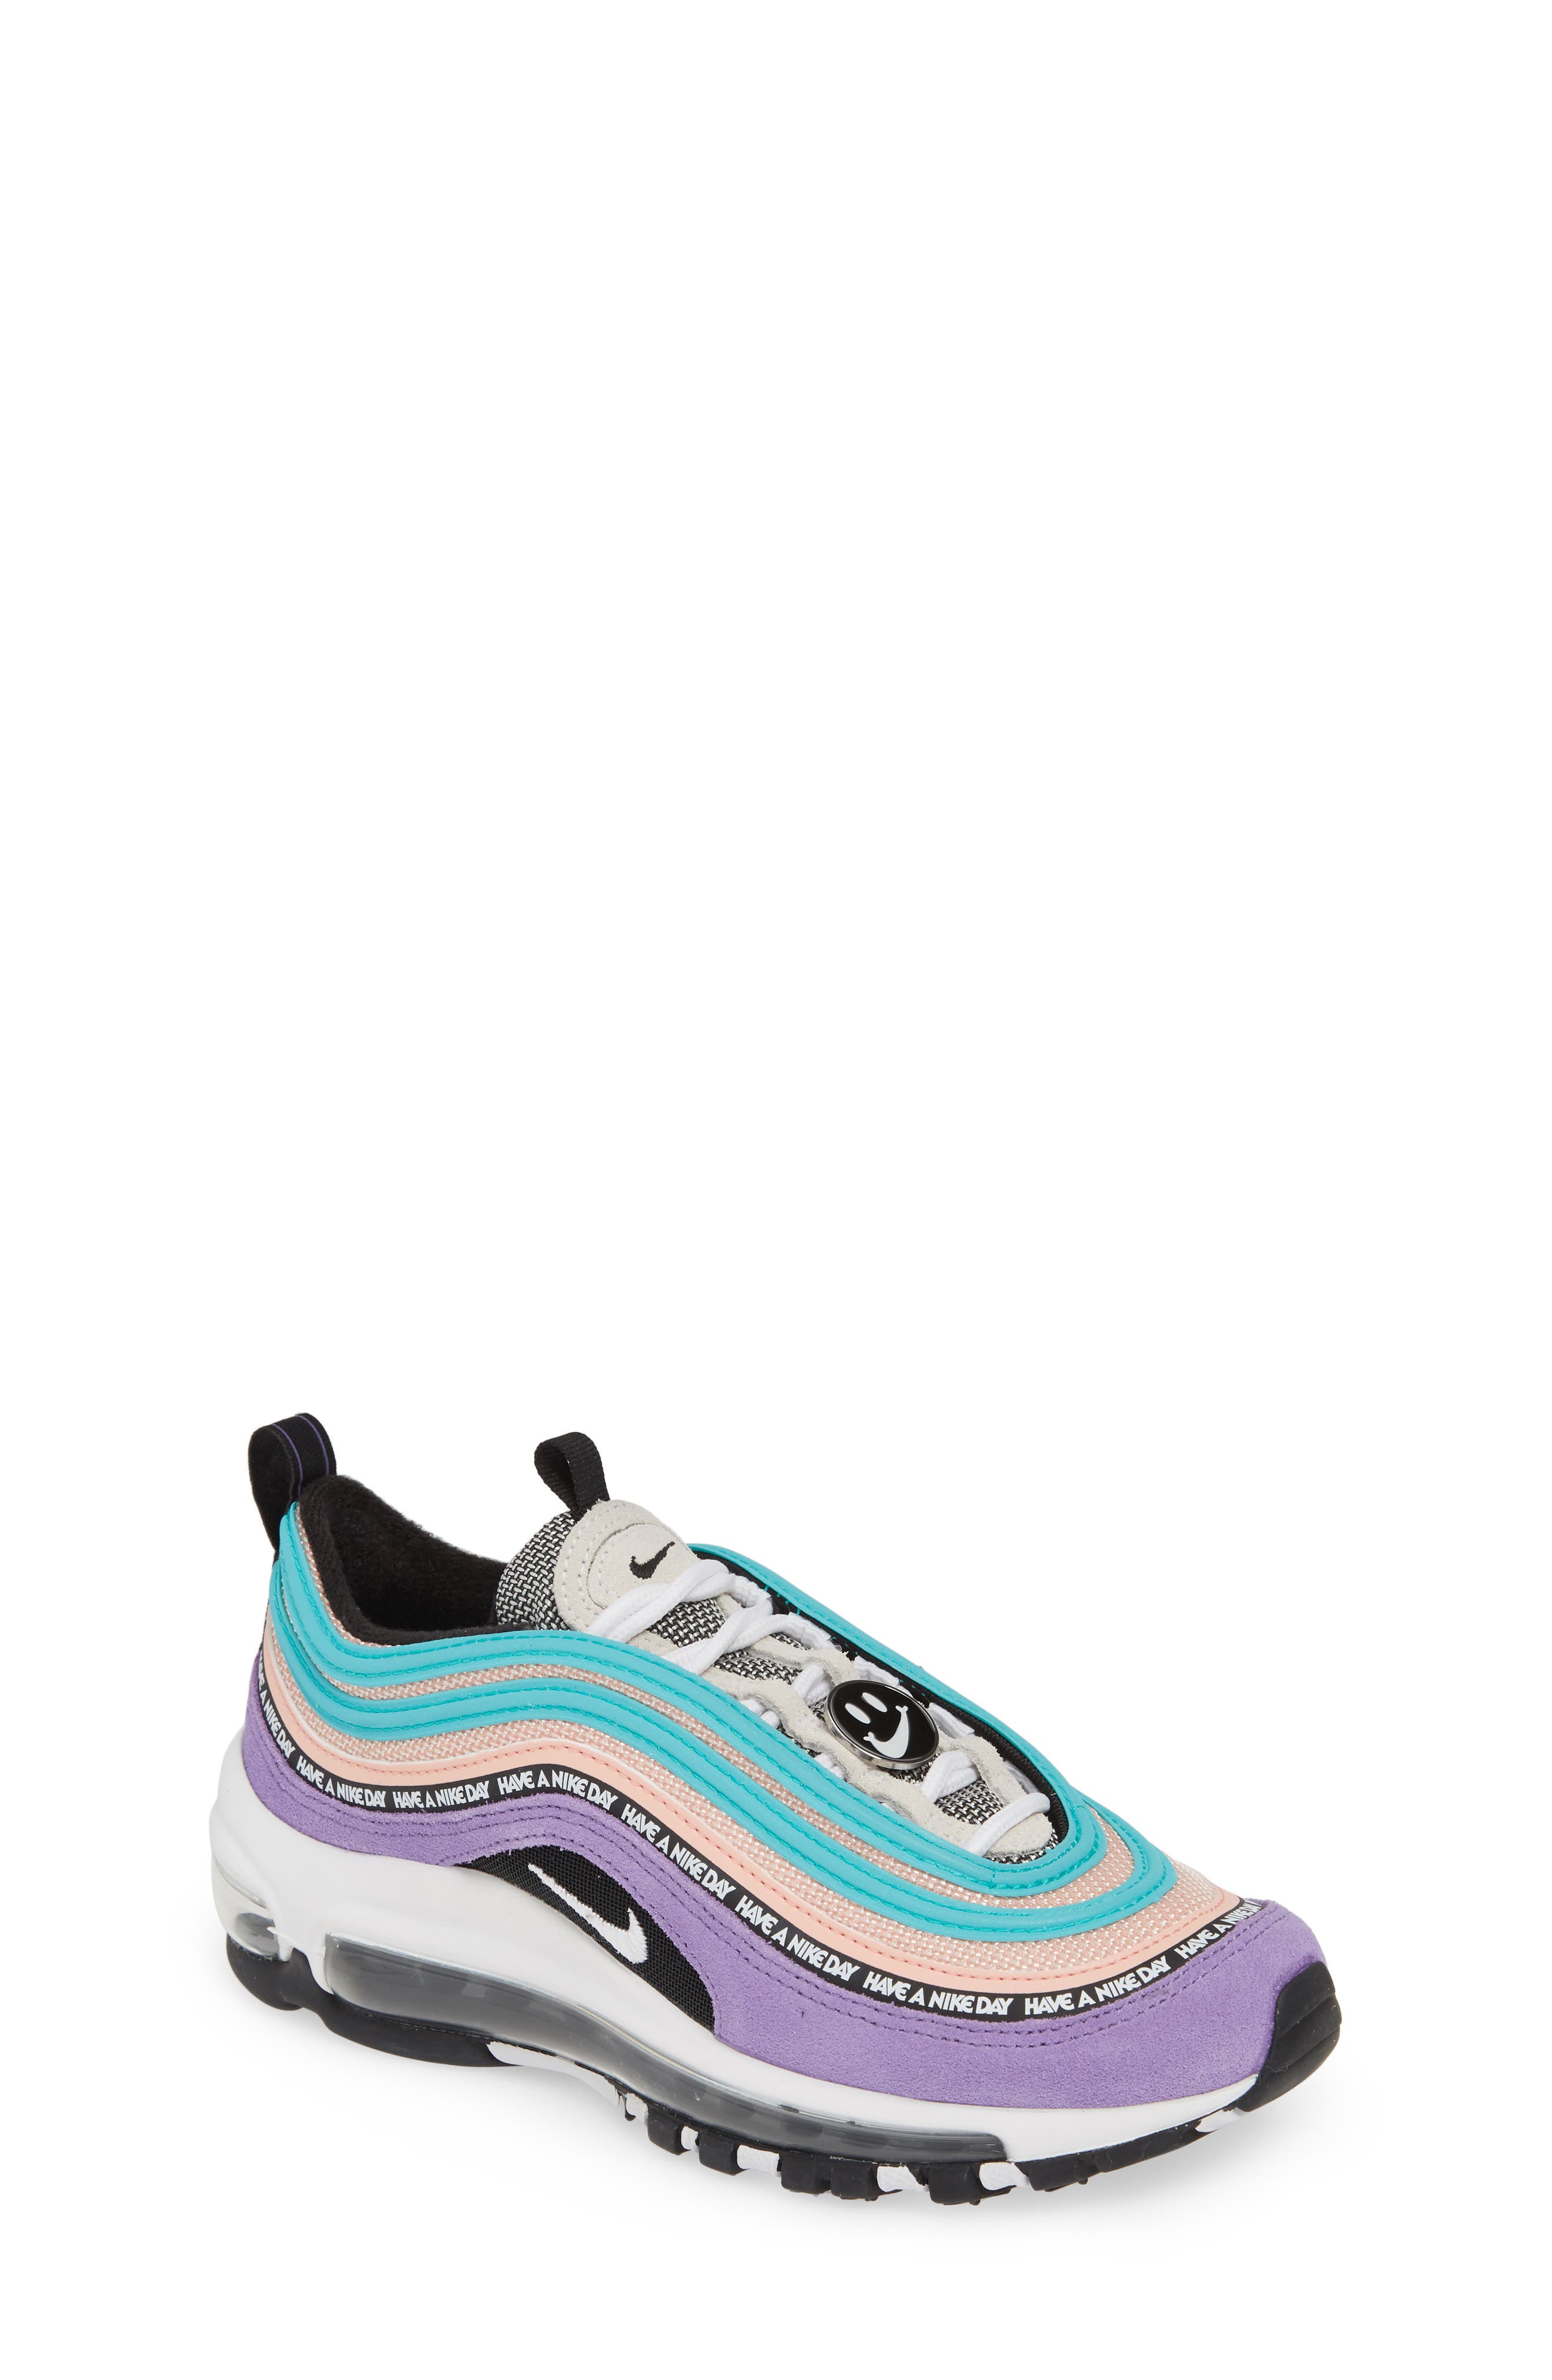 have a nike day air max 97 kids